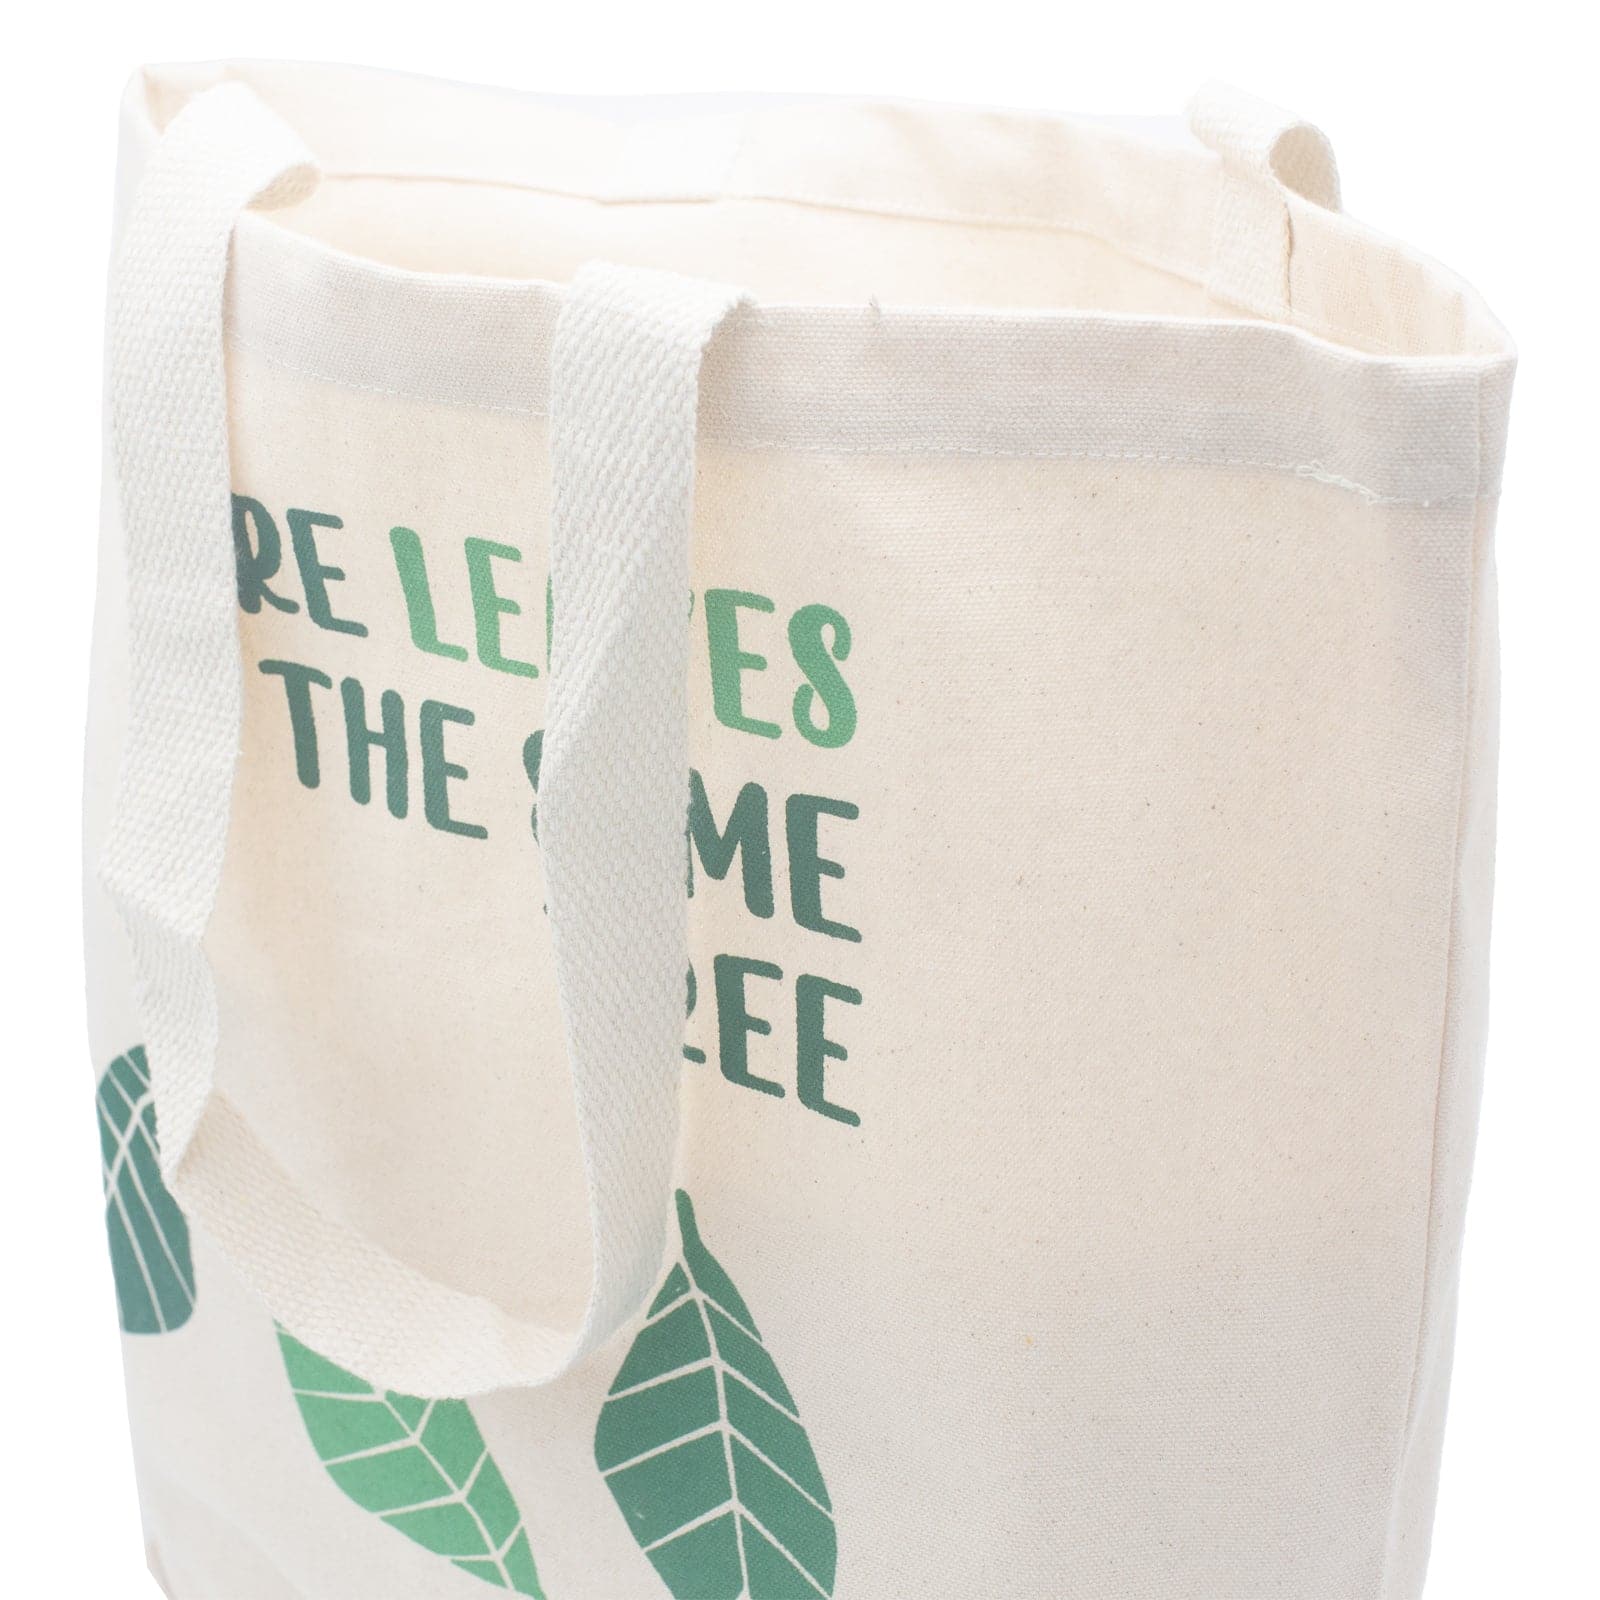 Printed Cotton Bag - We are Leaves - Natural - best price from Maltashopper.com PCB-02C